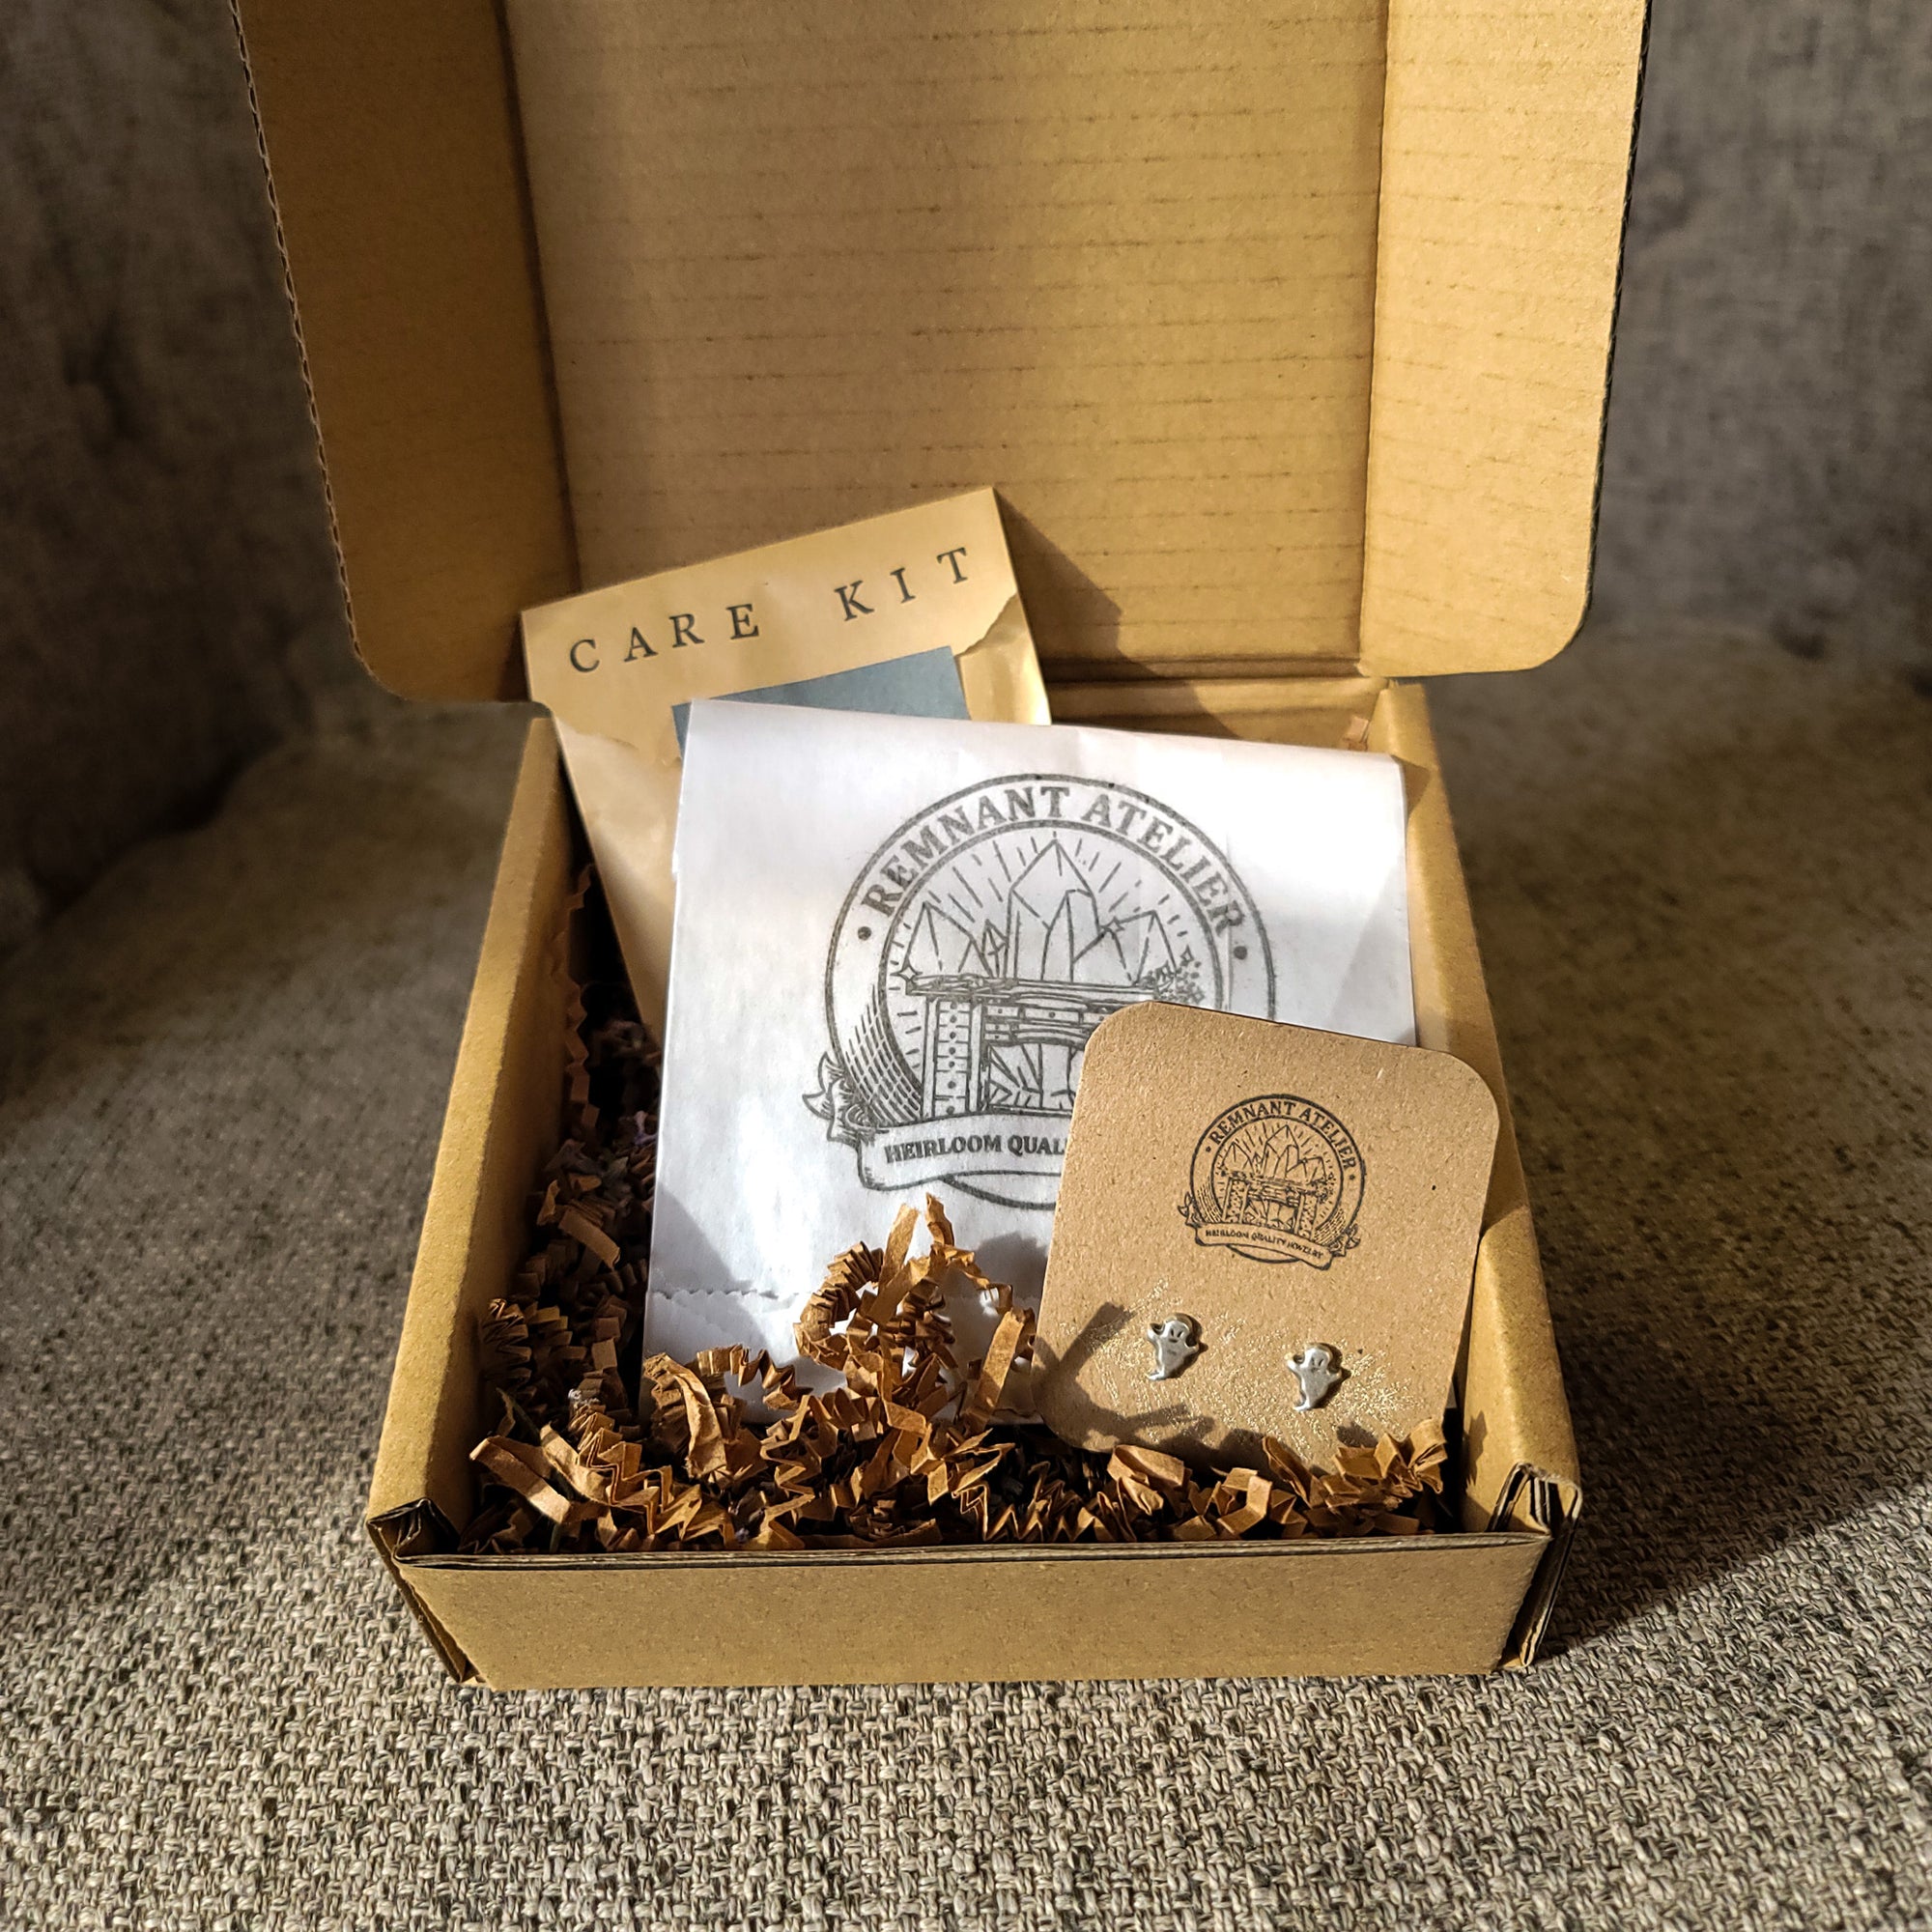 This photo shows a pair of handmade sterling silver ghost shaped stud earrings displayed on a cardboard earring card inside a cardboard box, surrounded by shredded cardboard. The package also includes a care kit to keep the jewelry in top condition.